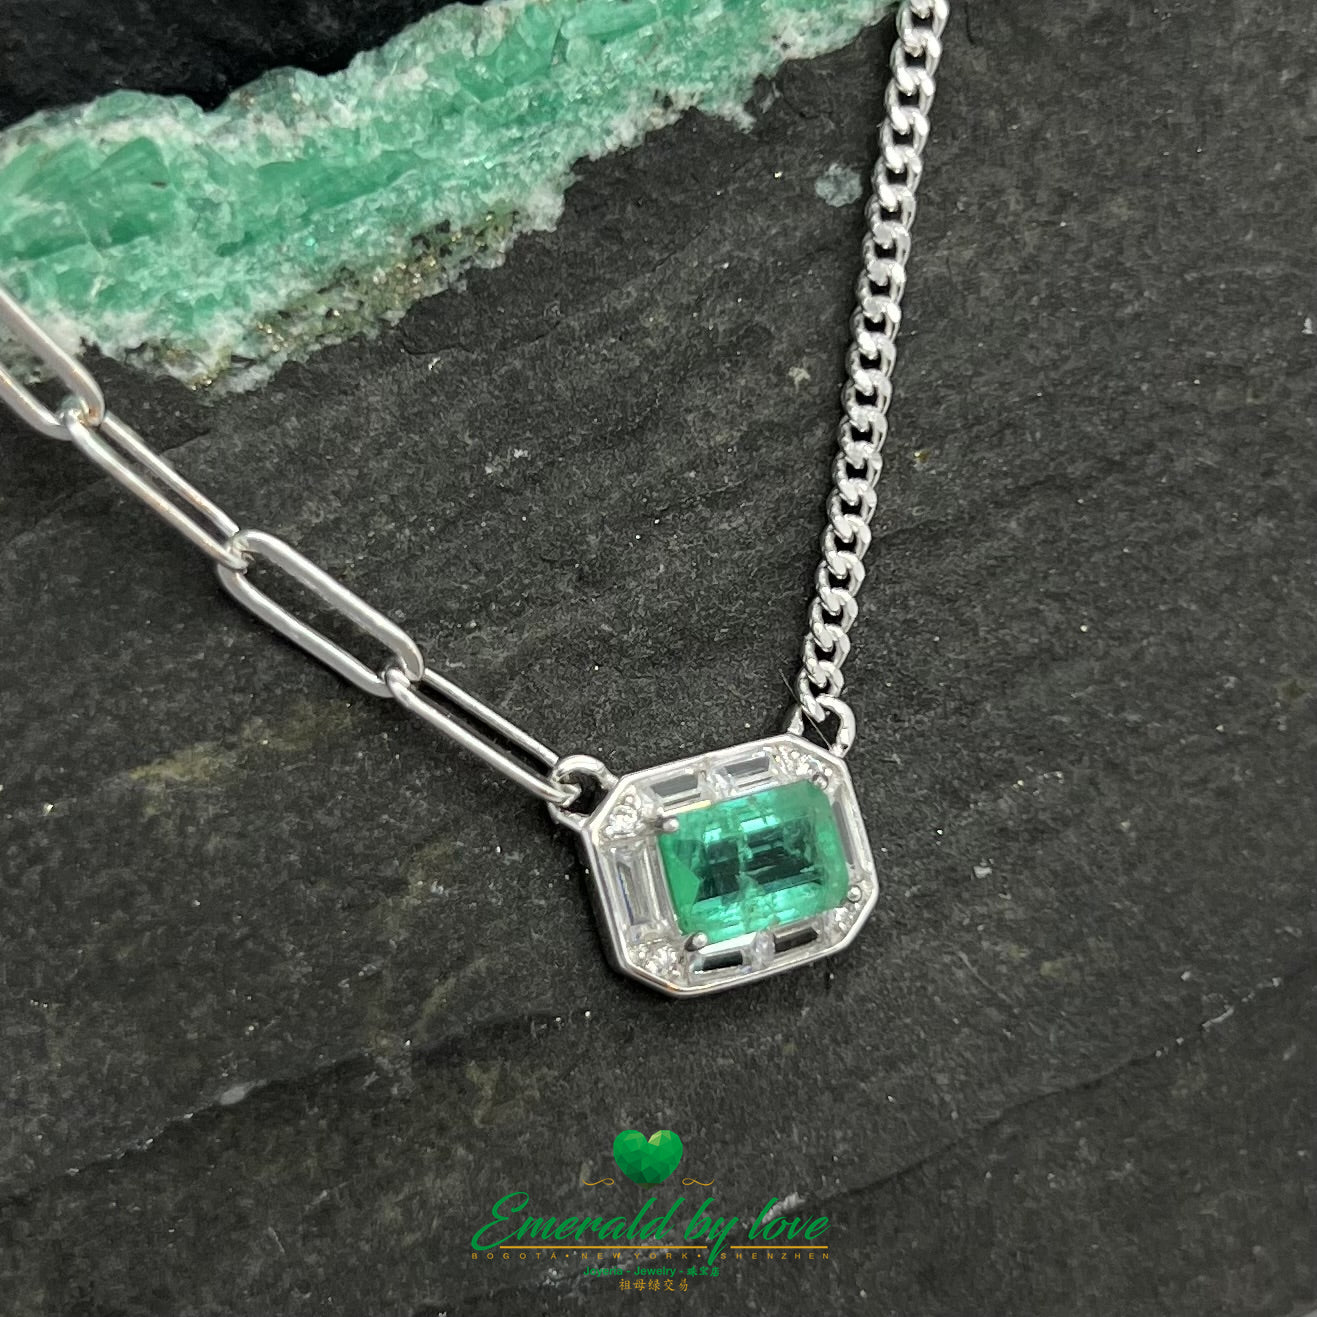 Rectangular Crystal Emerald Pendant with Double Chain Design